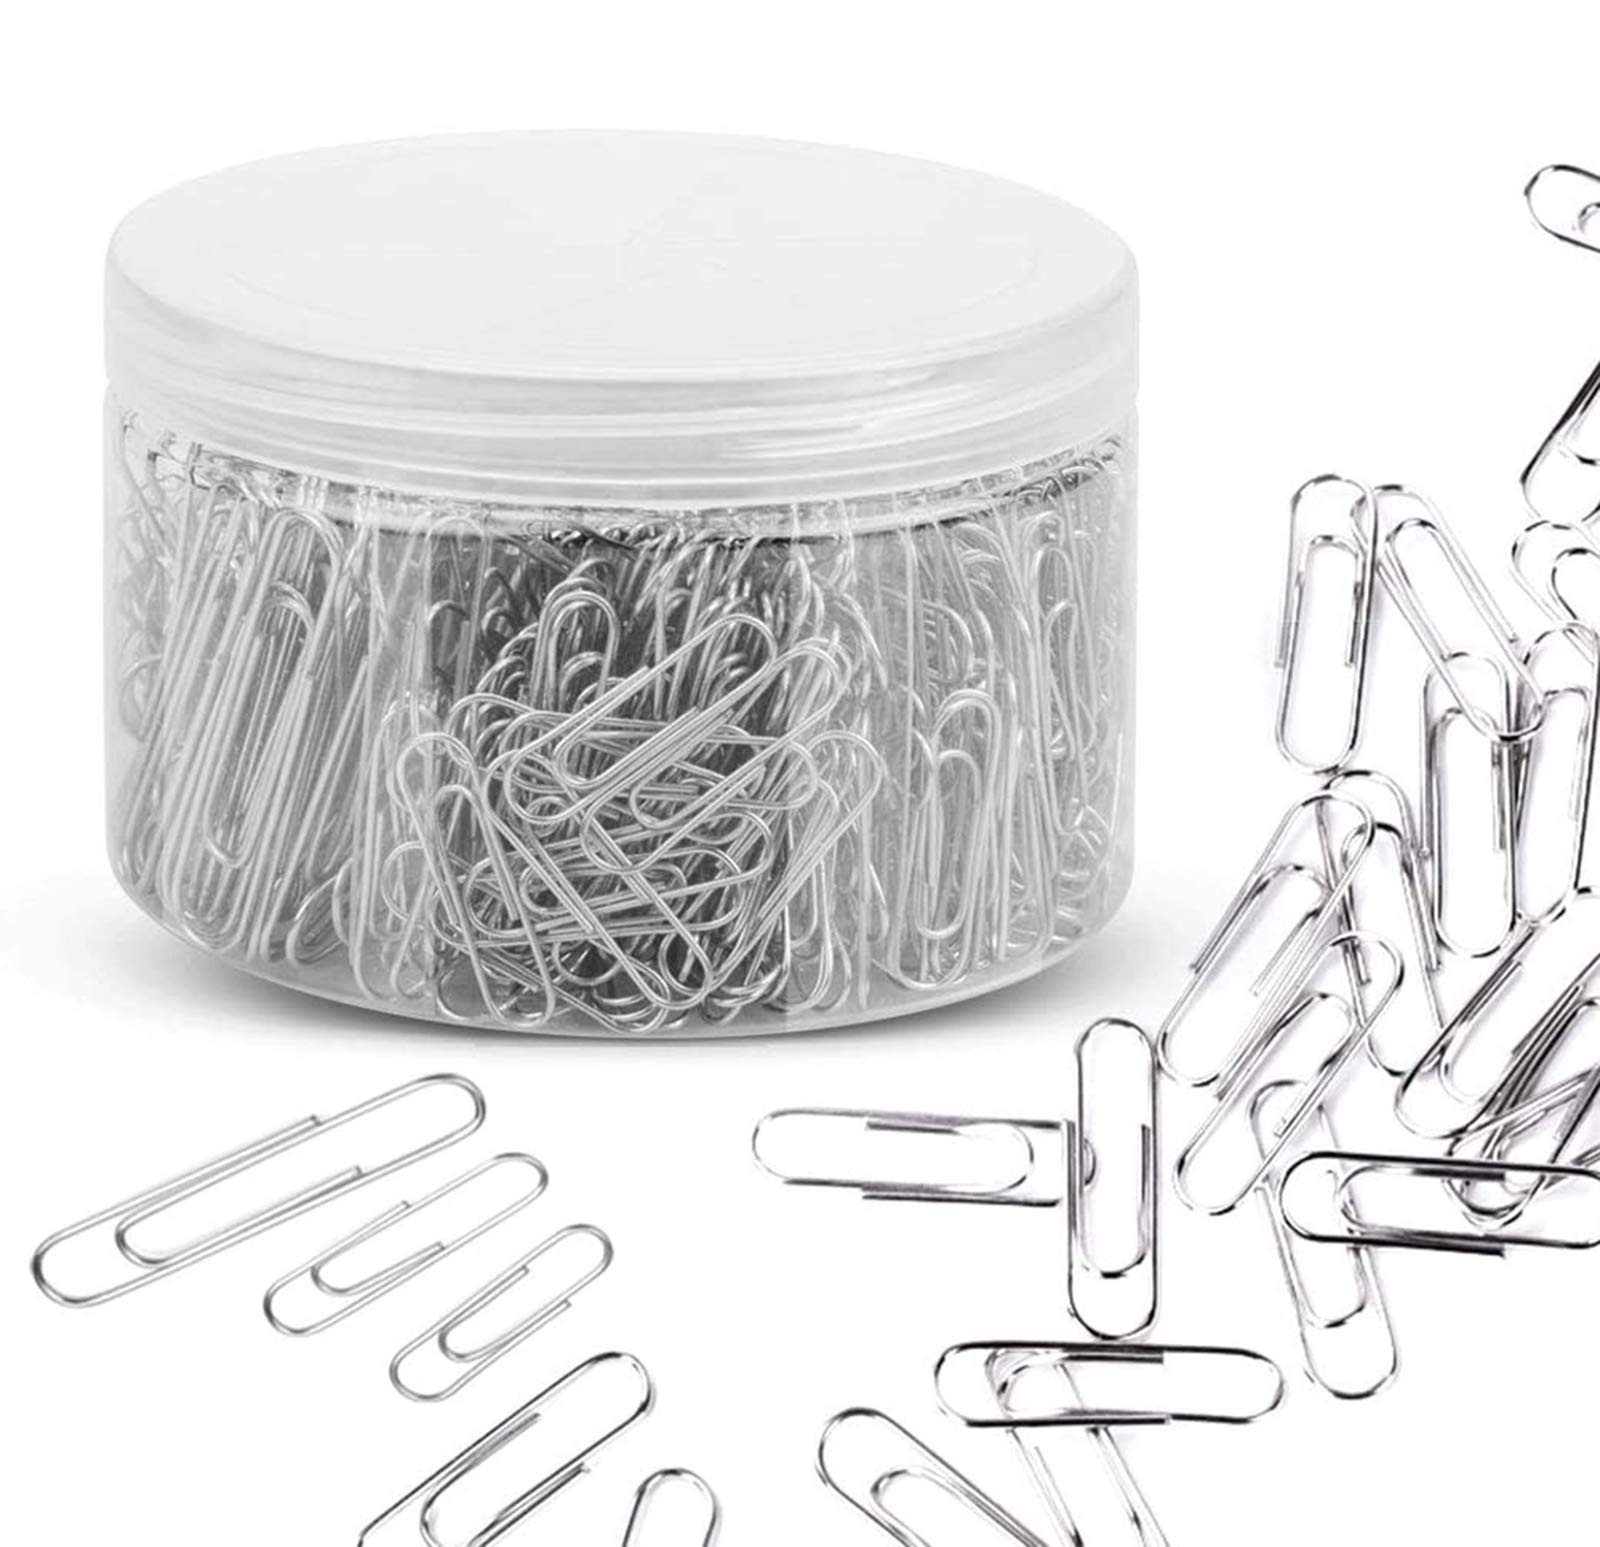 Book Cover 680 Pcs Paper Clips, Assorted Size Sliver Paperclips with Jumbo Medium Small (28/33/50mm), for Office School and Personal Document Files Organizing (Silver)